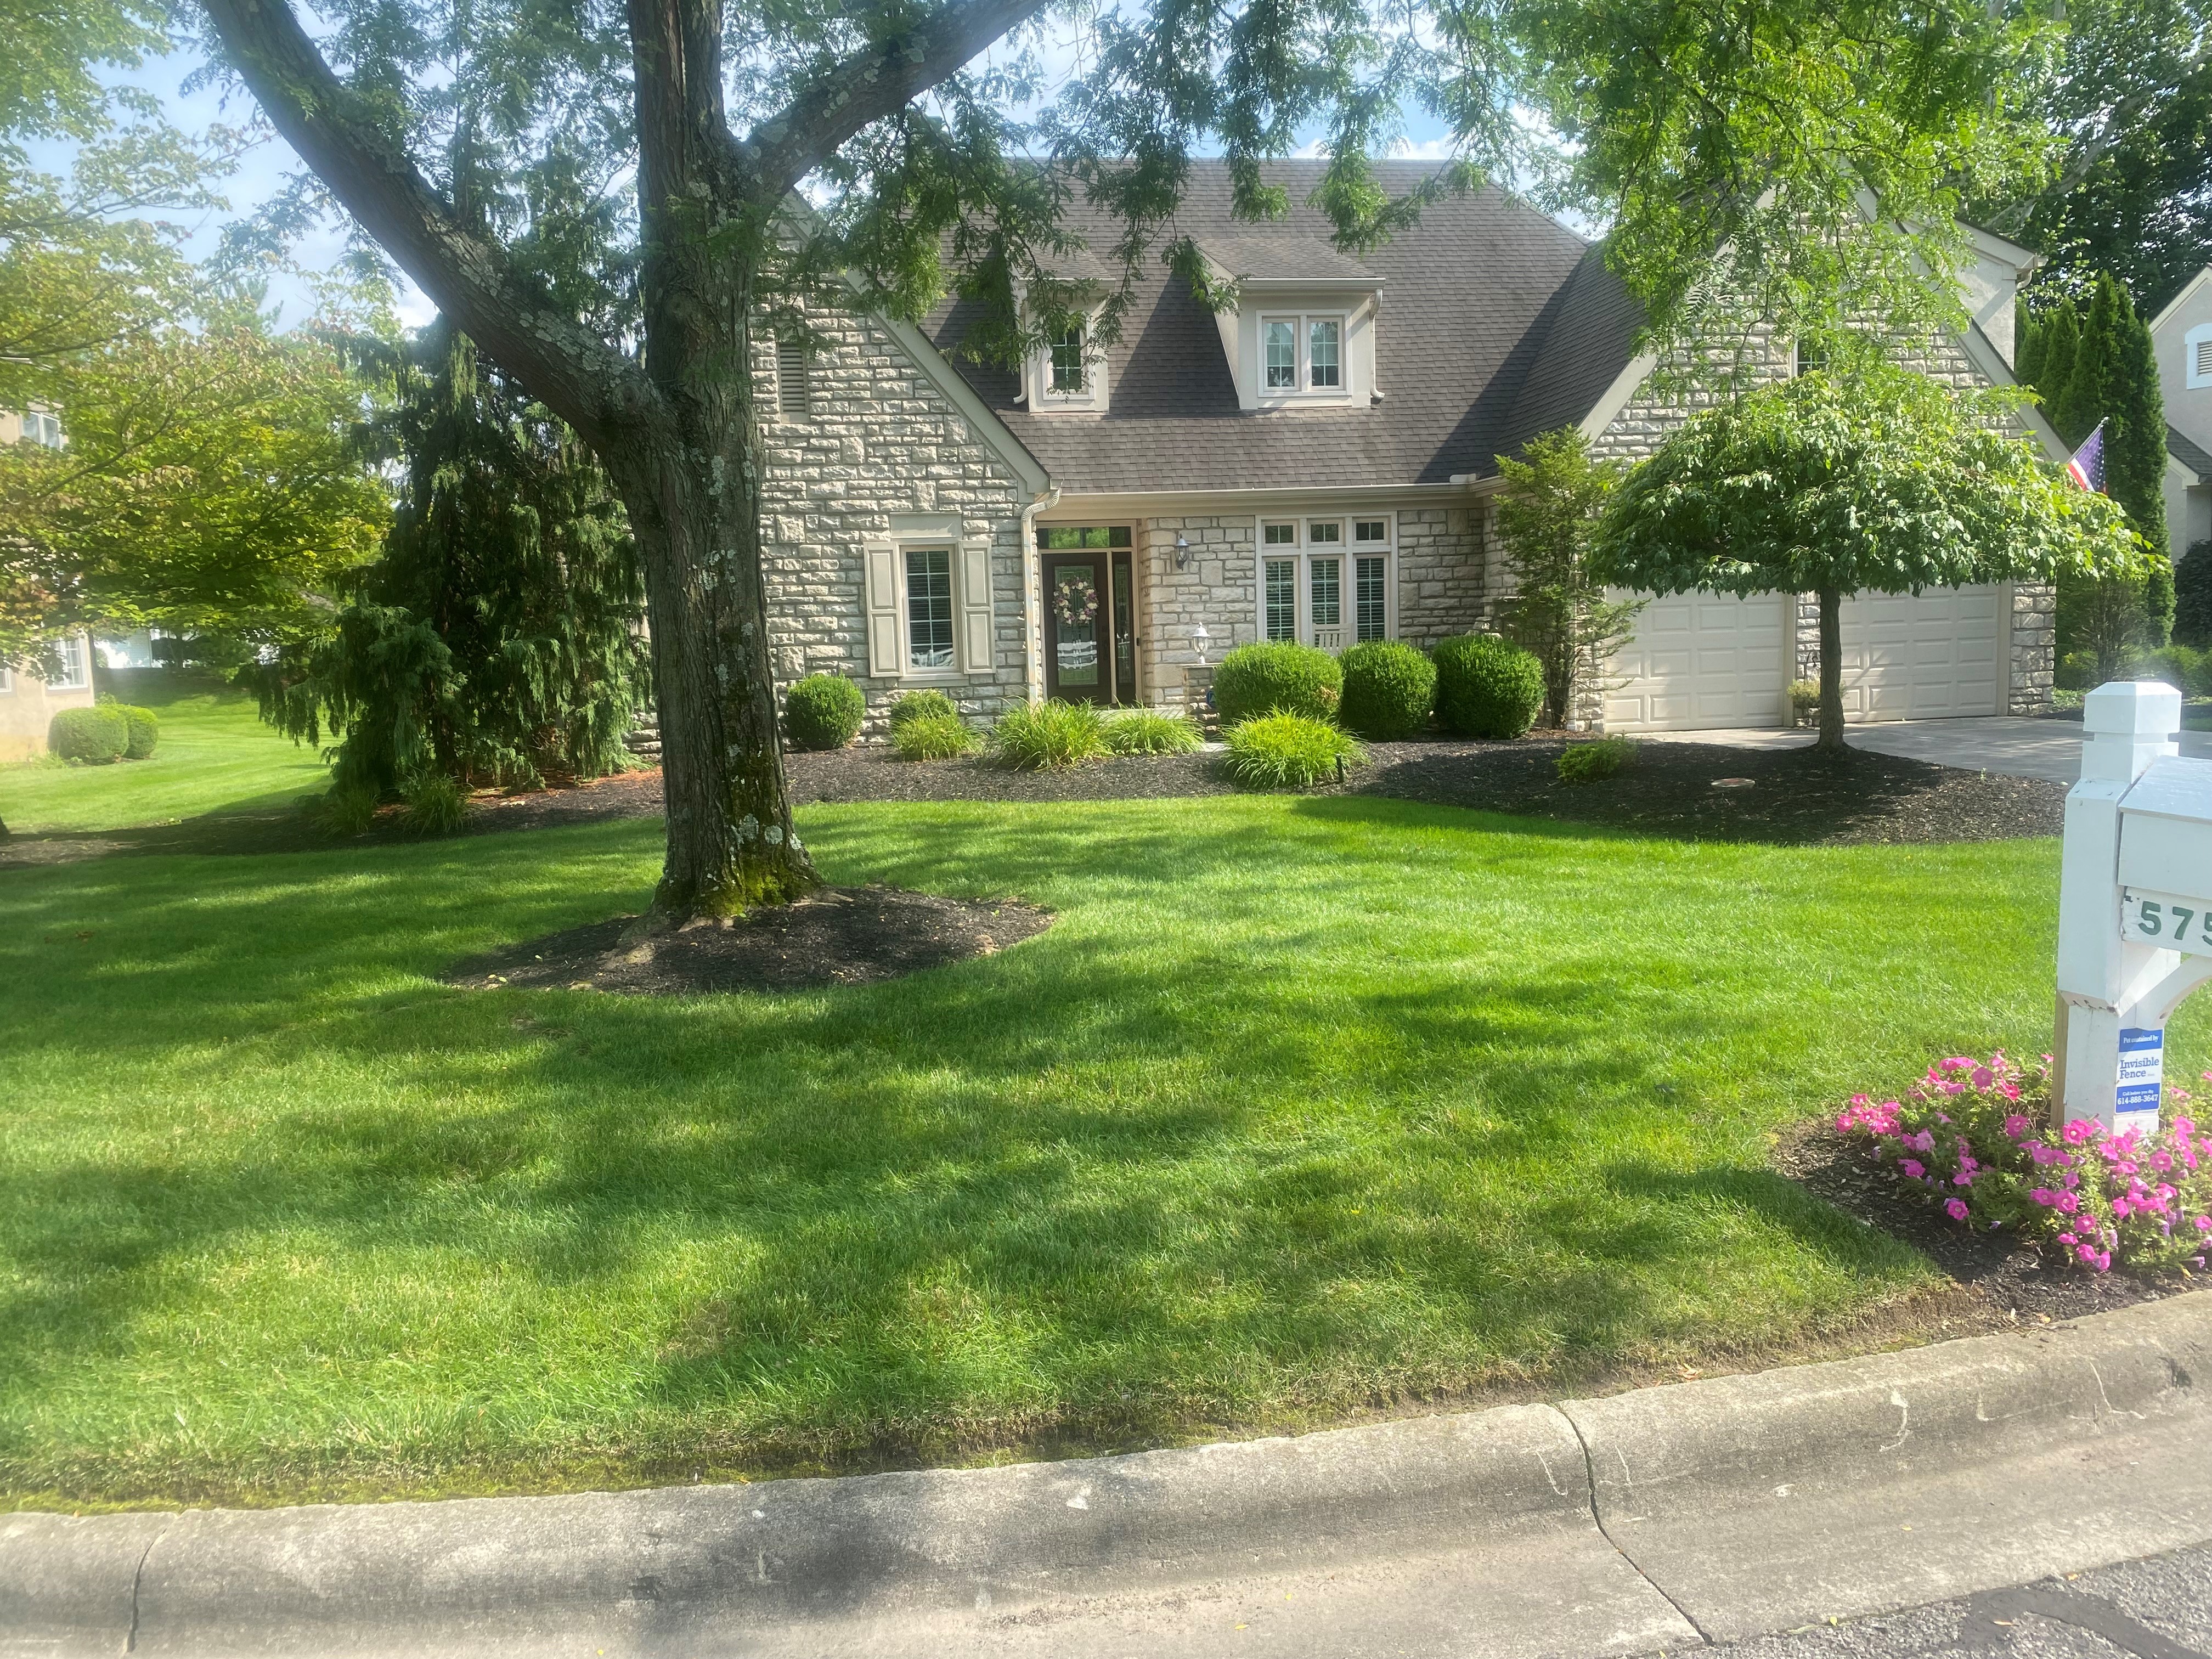 Lawn care services in Westerville, Ohio